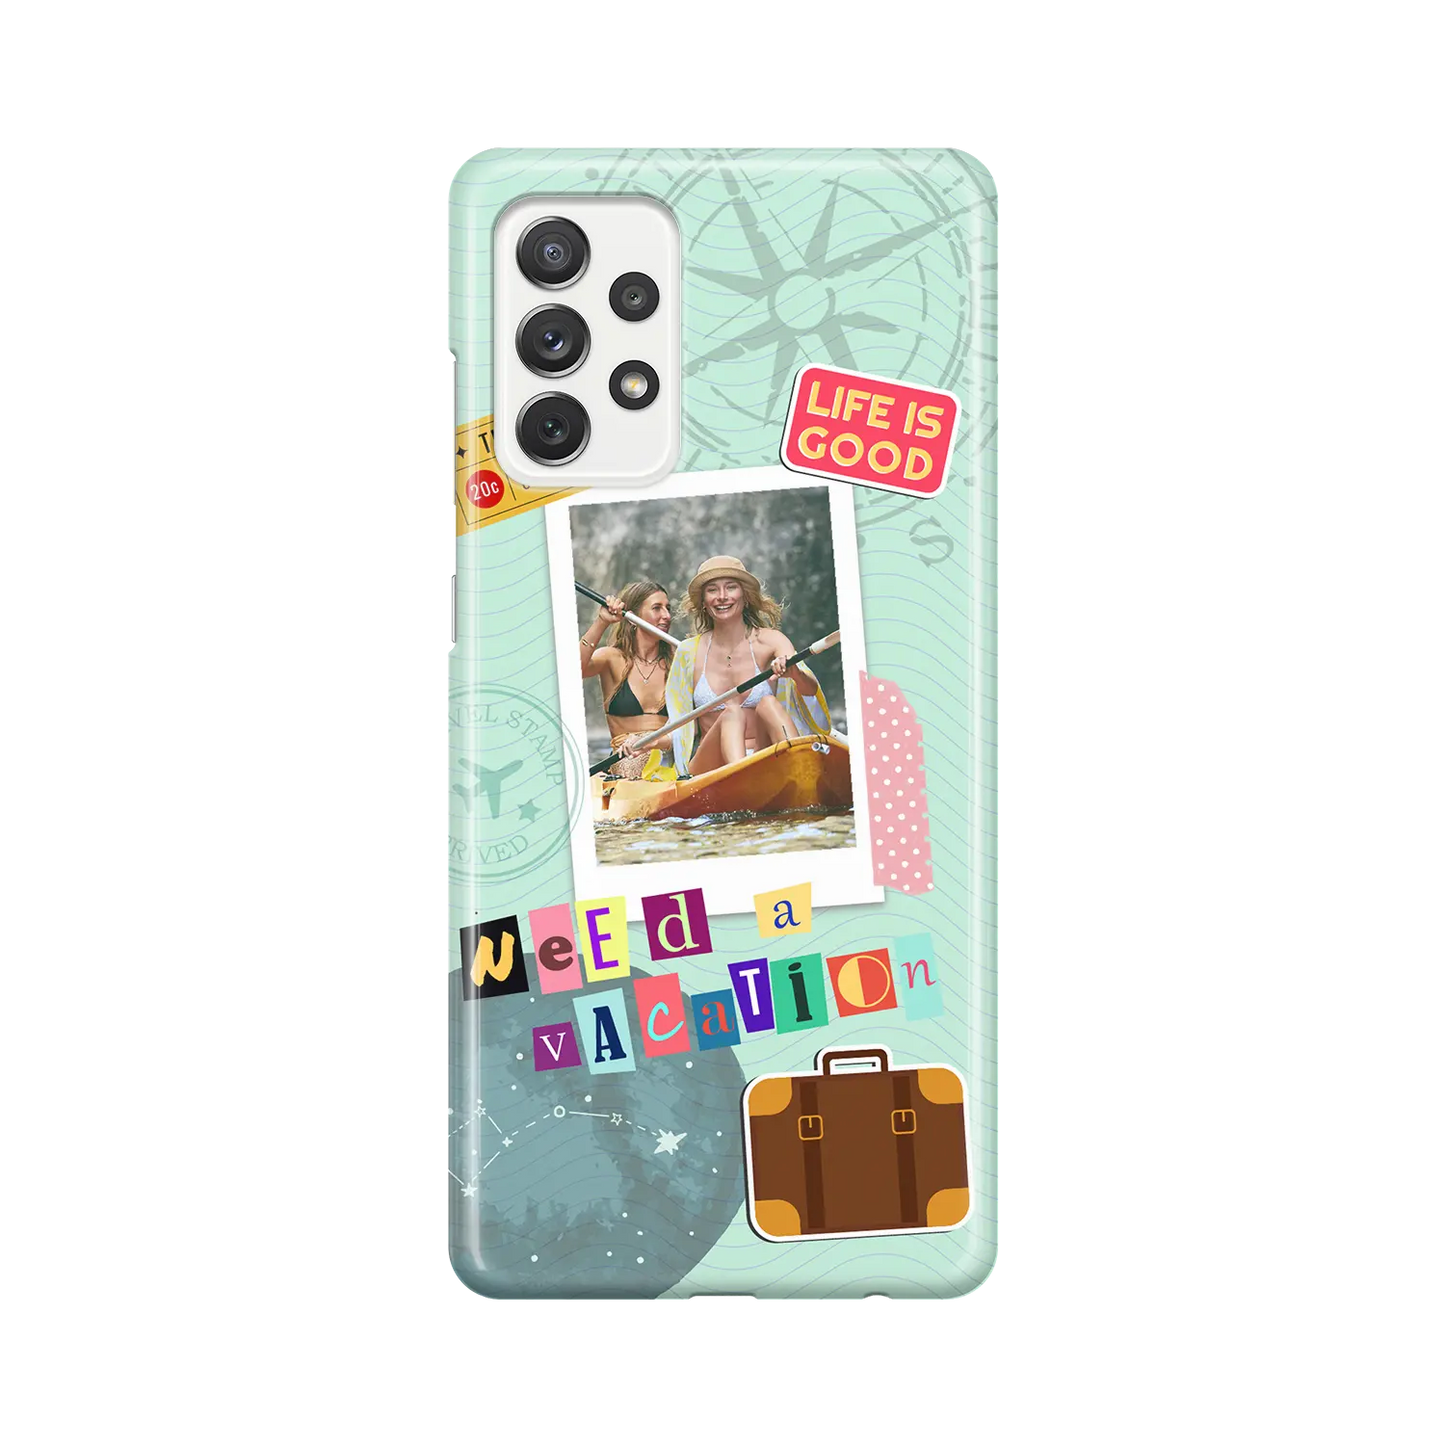 Need A Vacation - Personalised Galaxy A Case